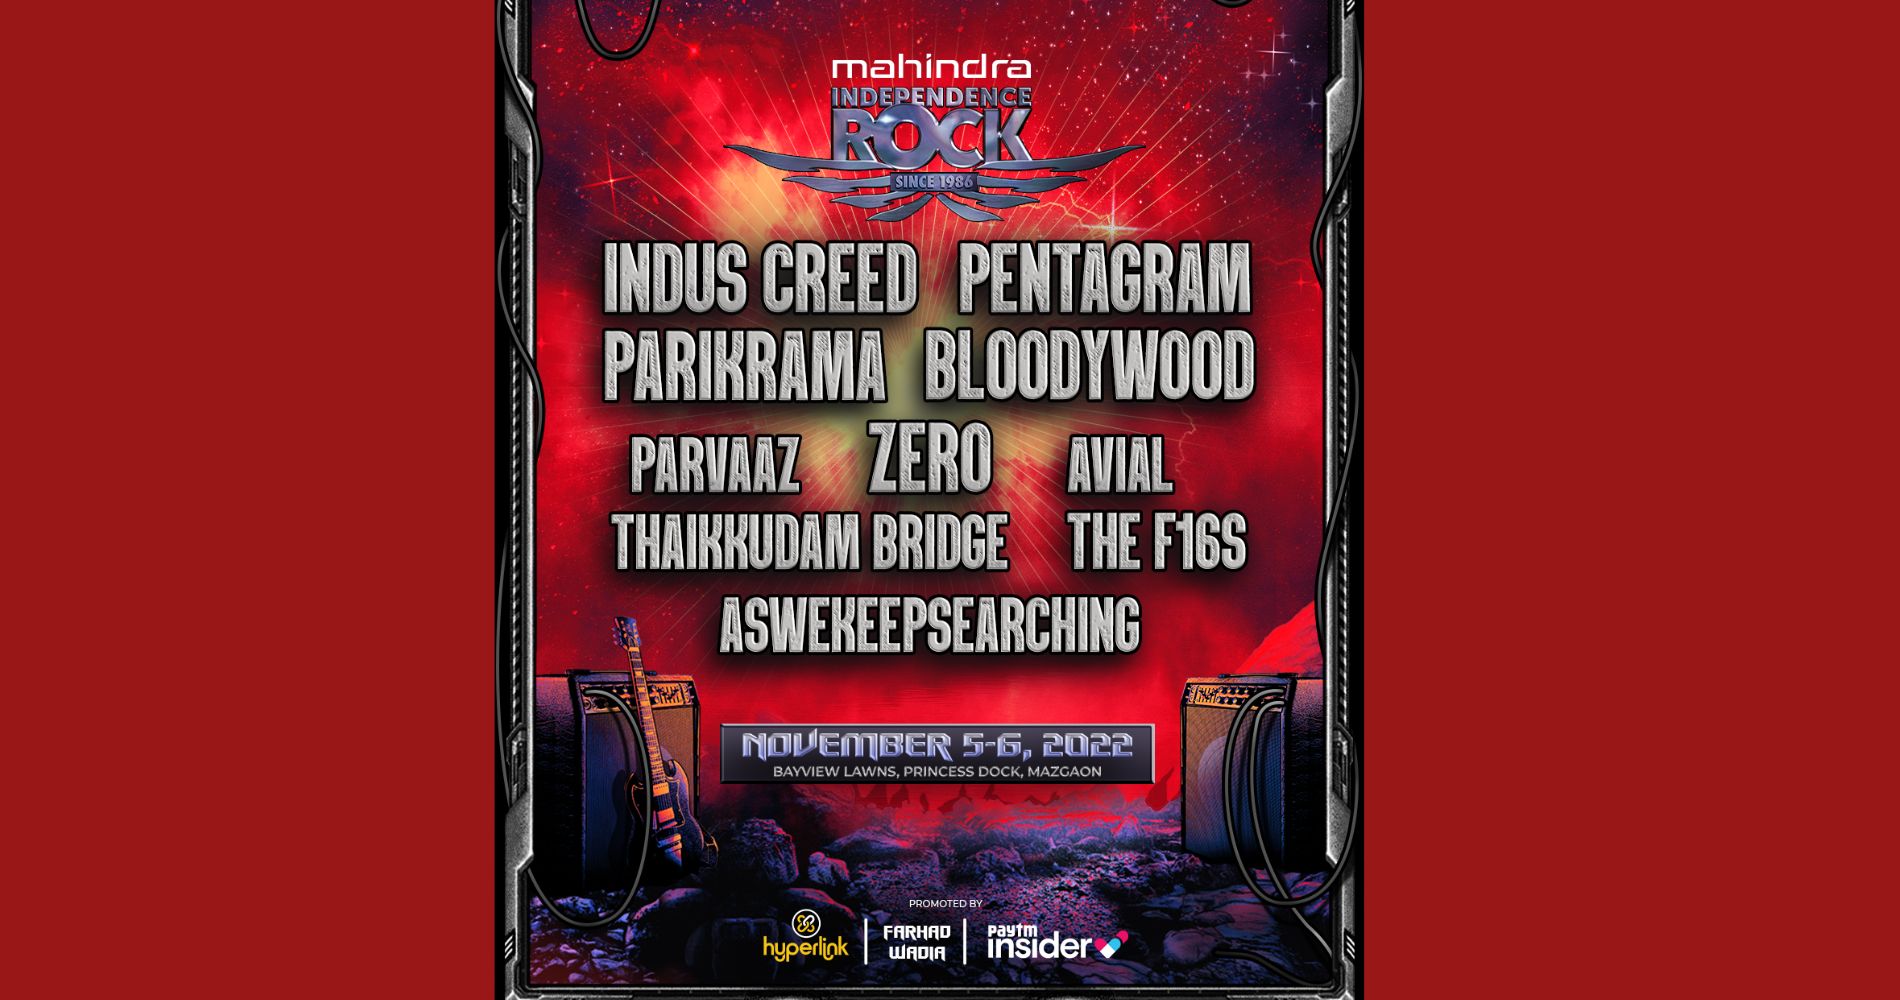 Mahindra I-Rock announces a stellar line-up of 10 ultra-talented bands